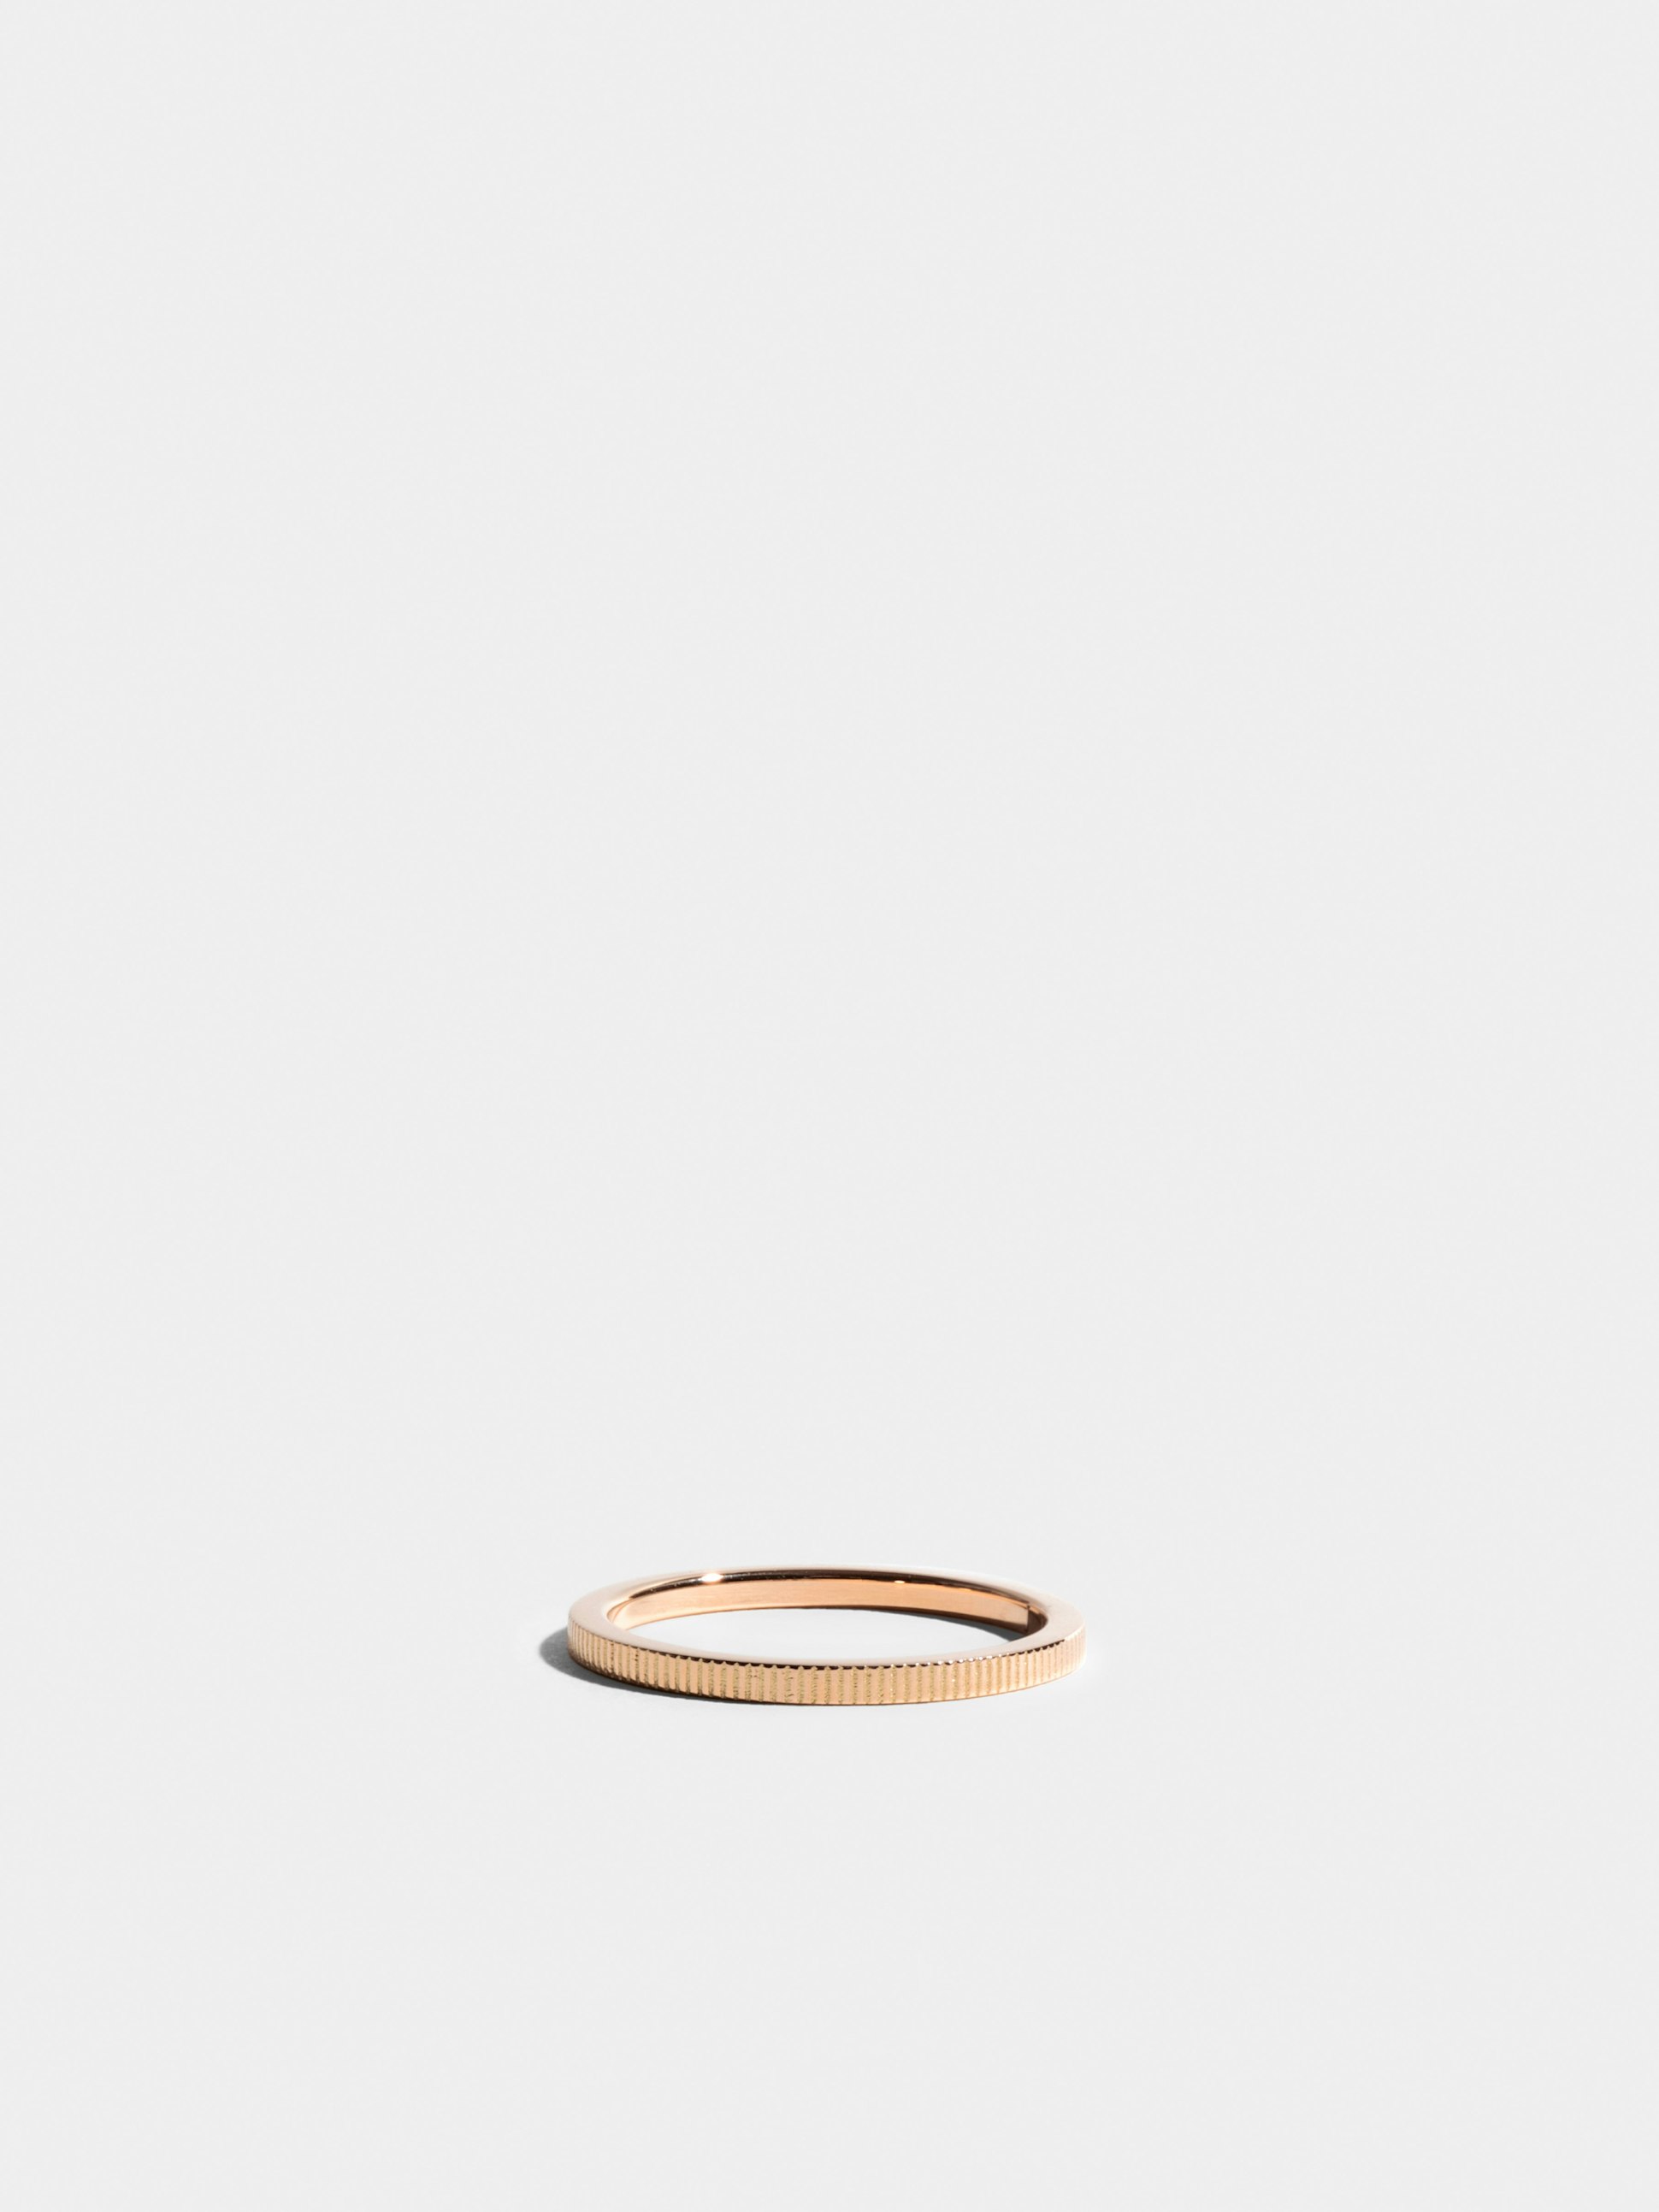 Anagramme ridges ring in 18k Fairmined ethical rose gold